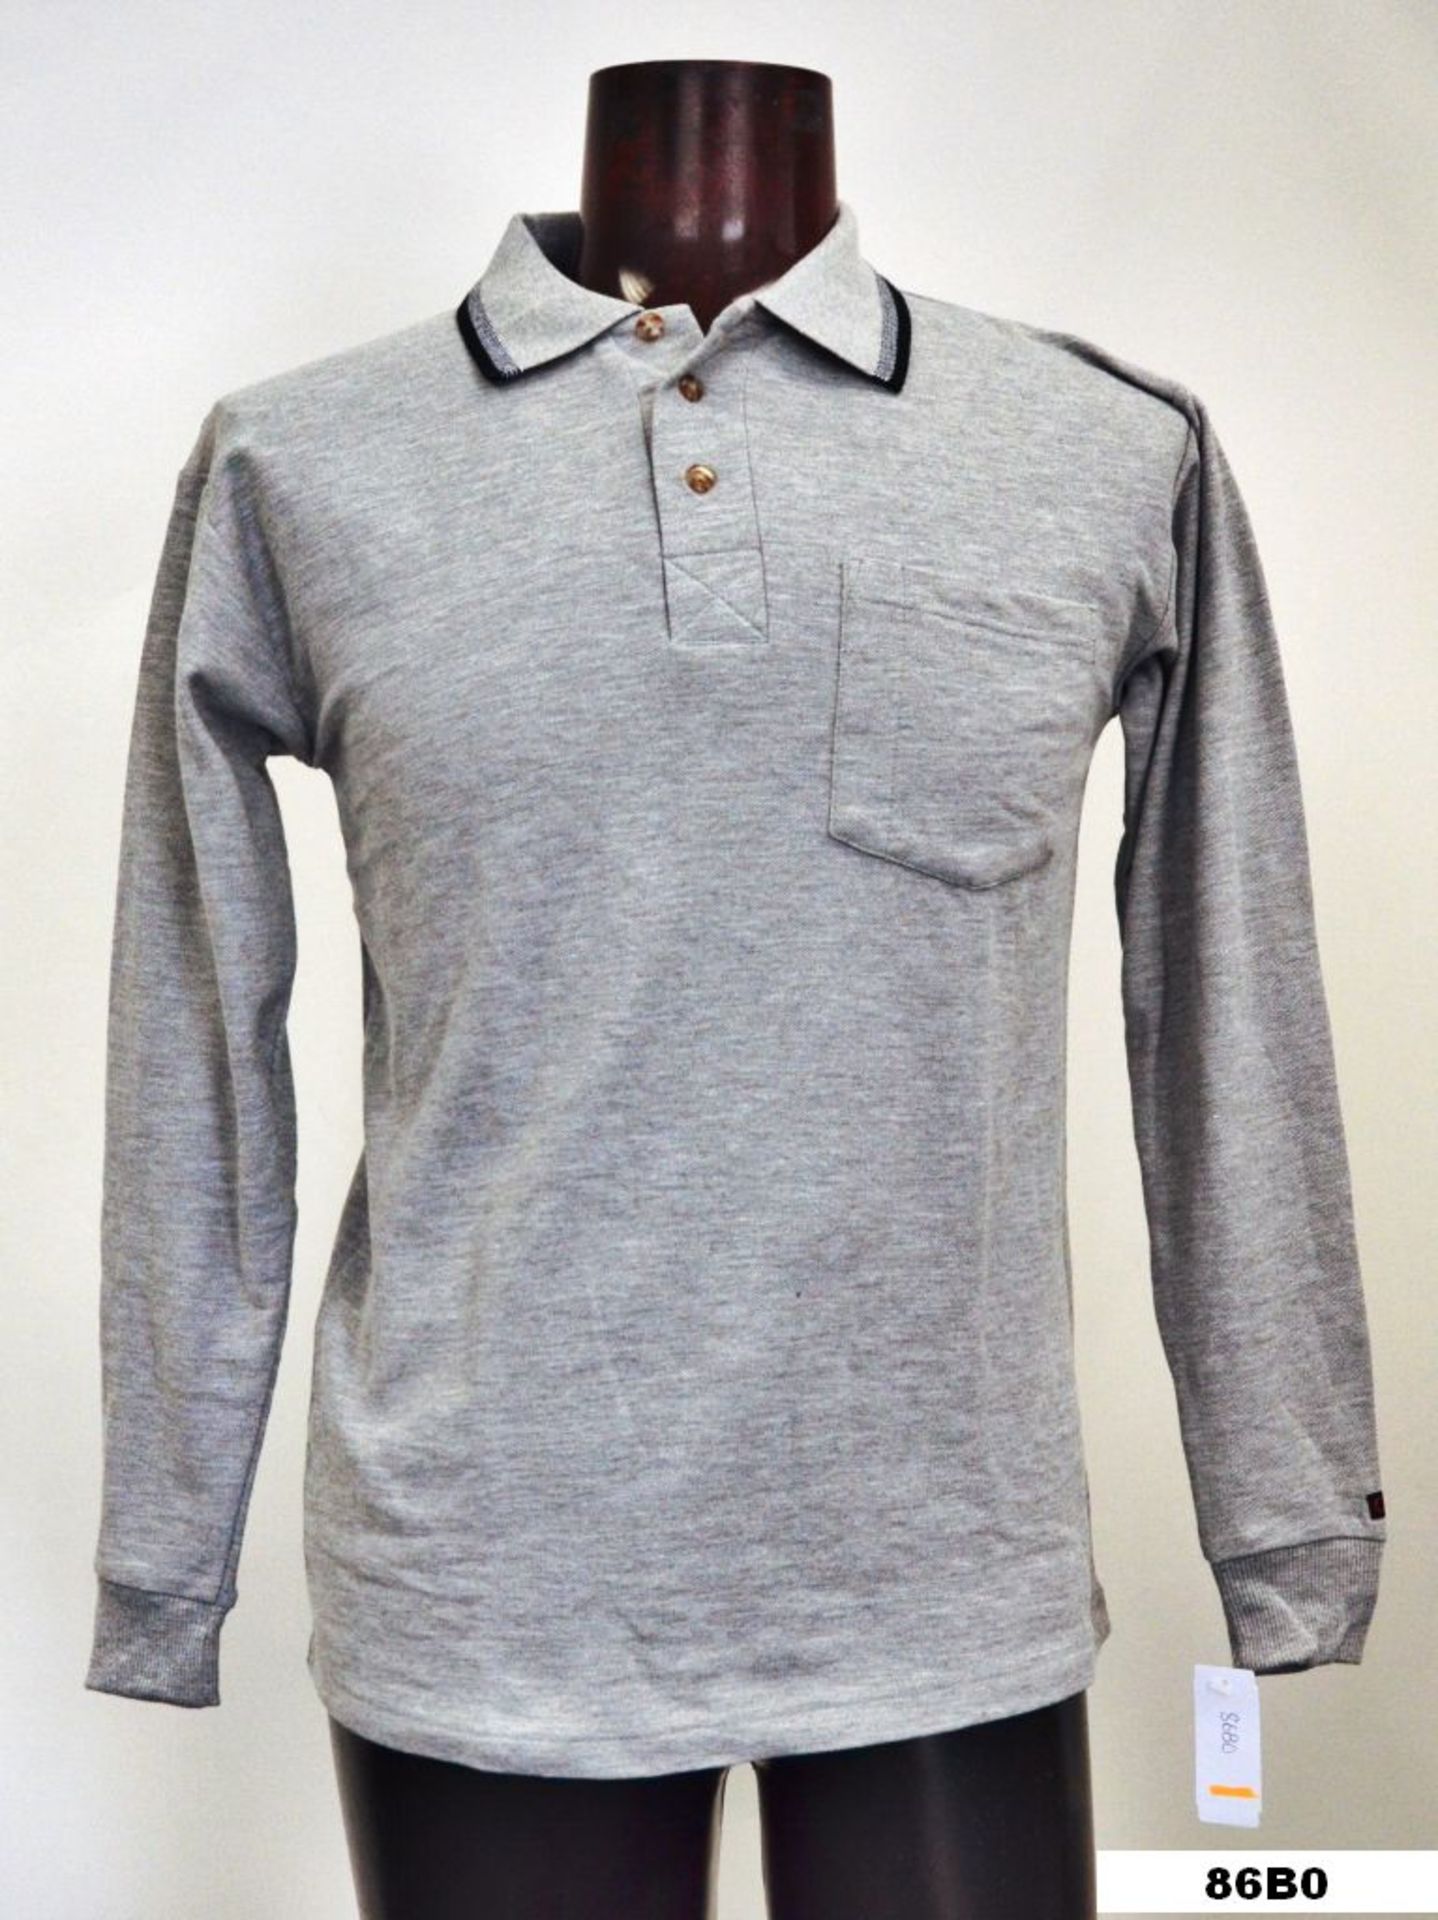 97 x Polo L/S / Assorted beige,black and grey / 86B0 - Image 3 of 3